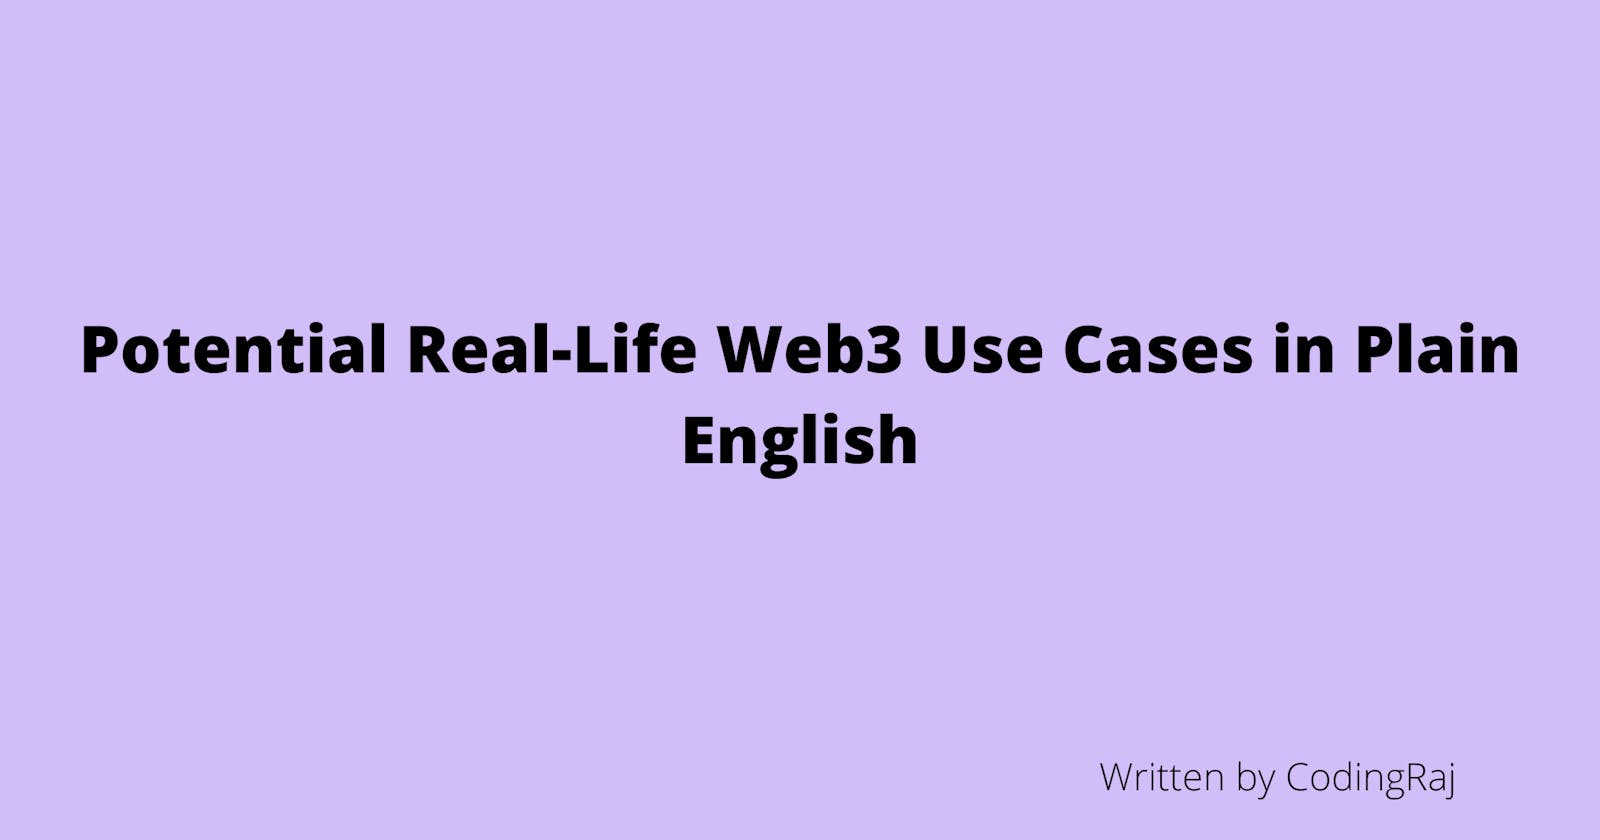 Potential Real-Life Web3 Use Cases in Plain English